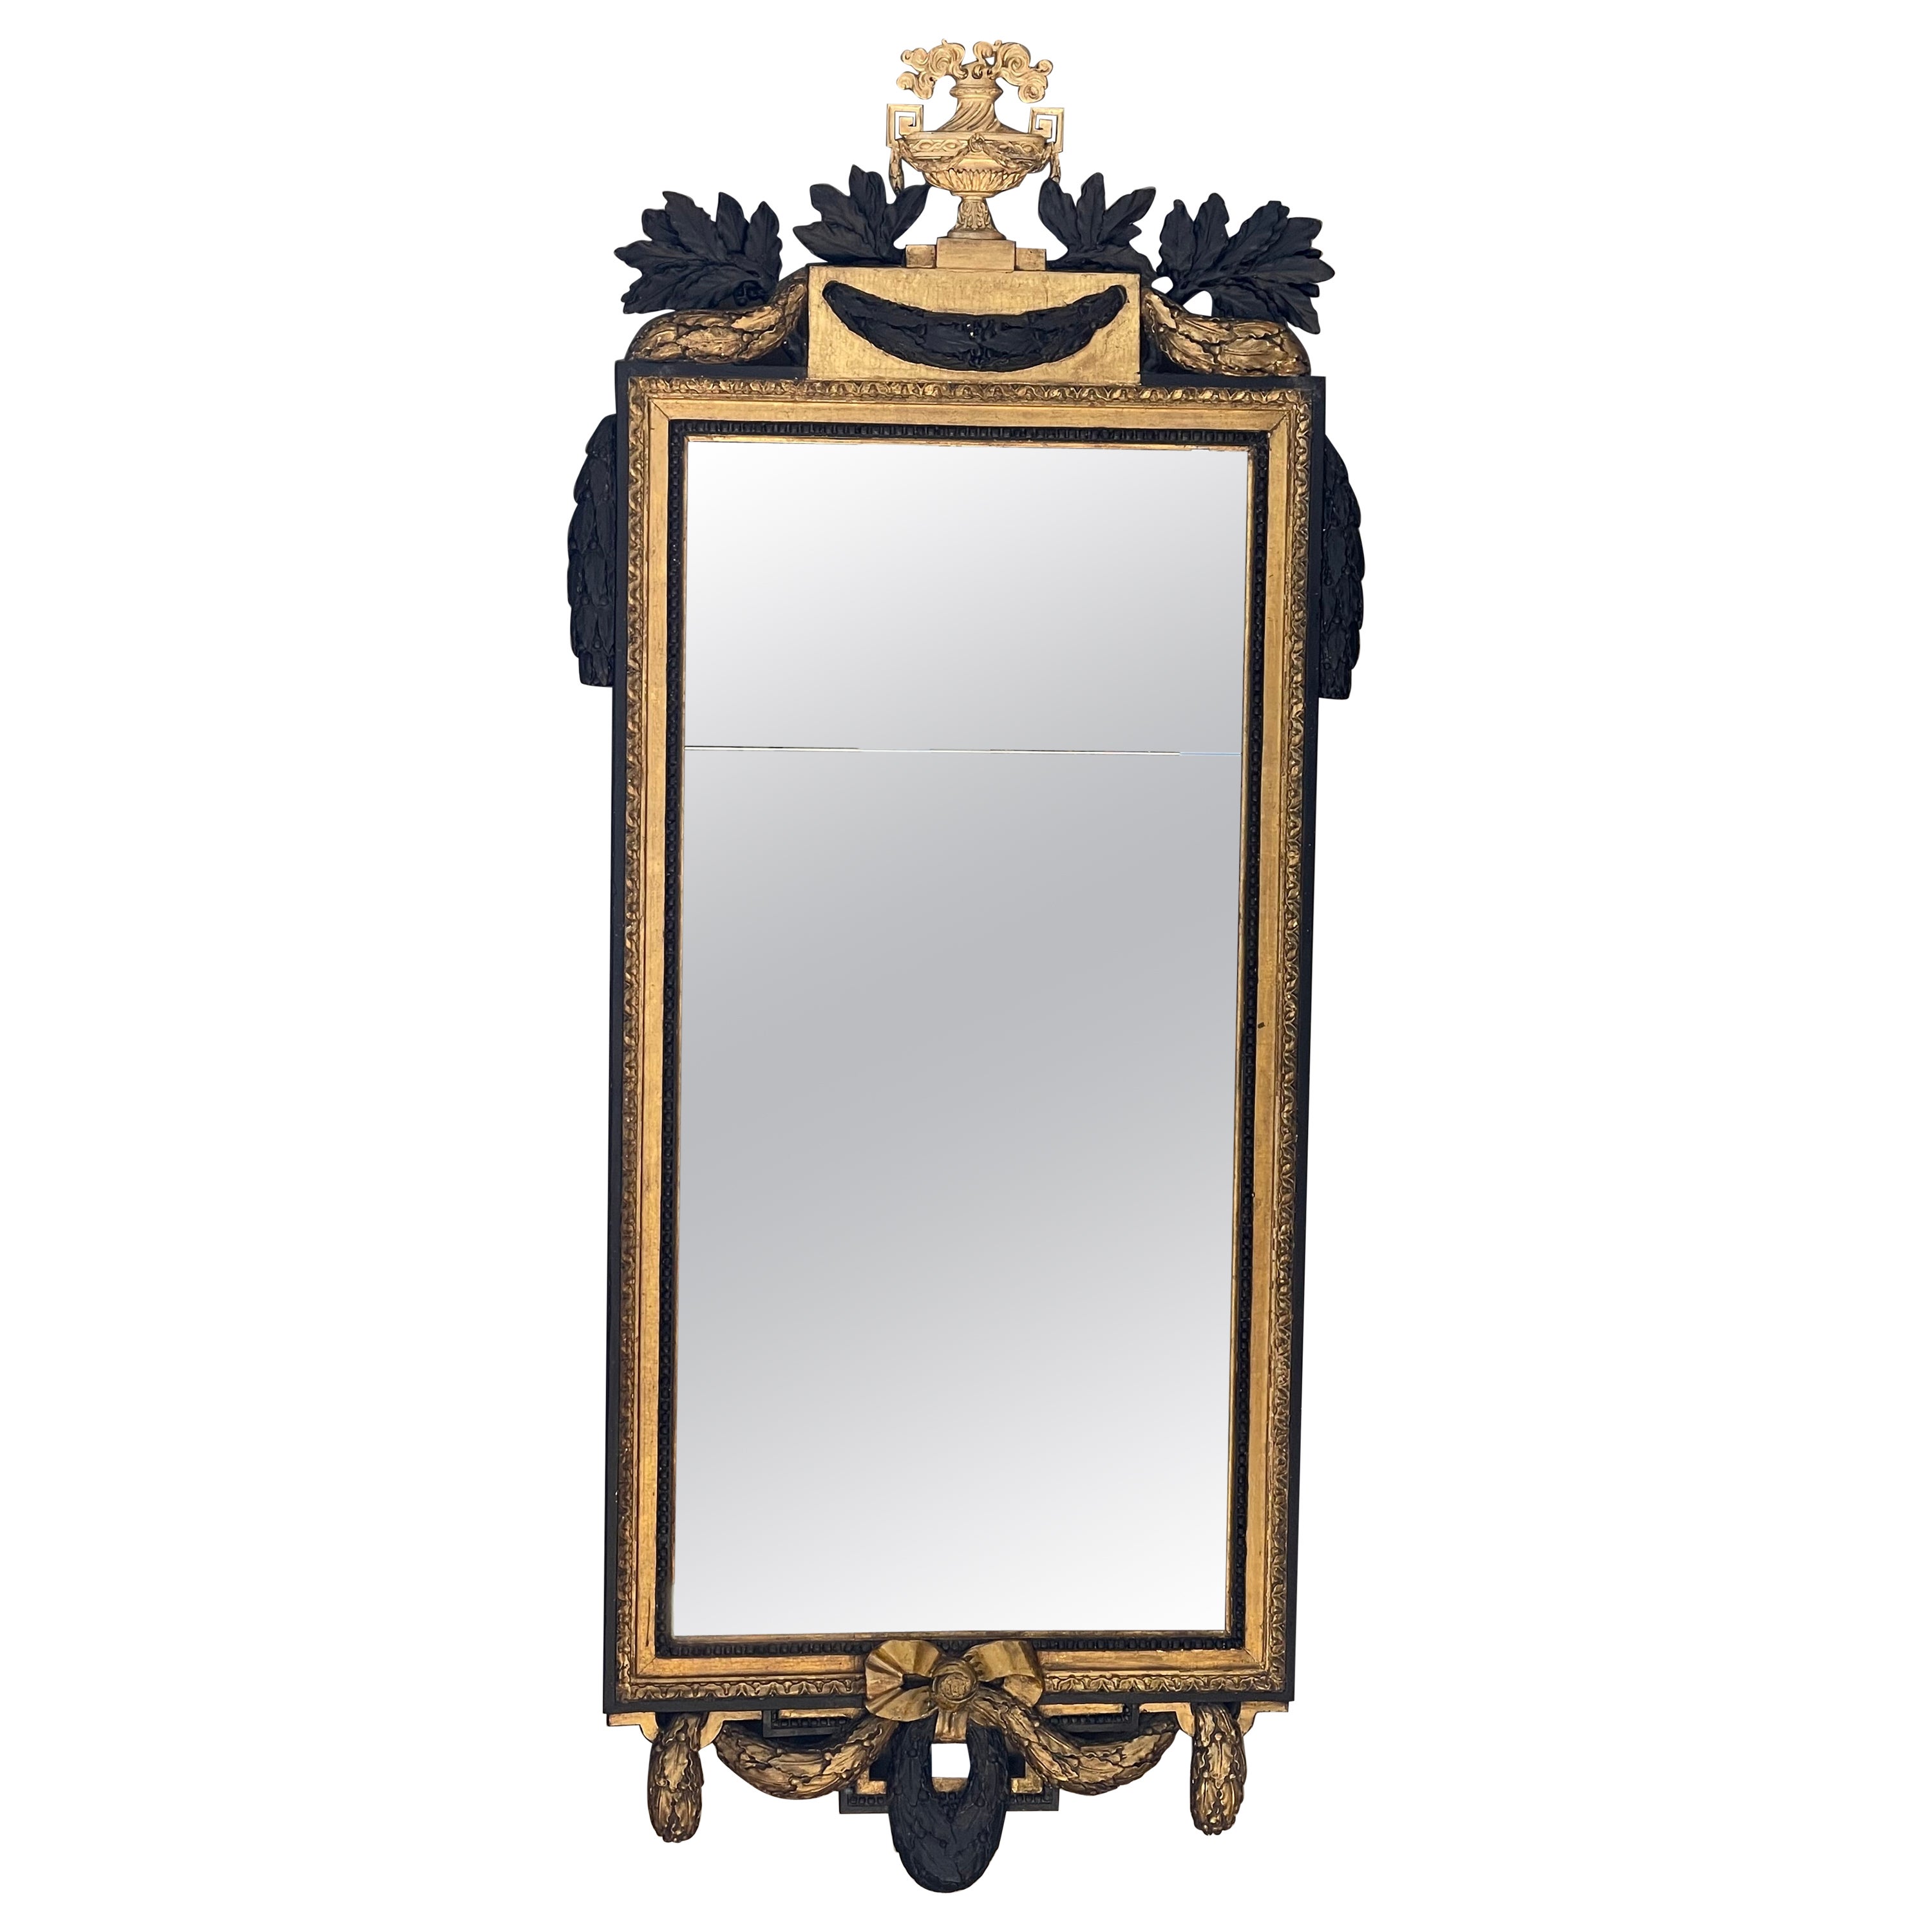 Early 19th Century Gustavian Parcel Gilt Pier Mirror For Sale